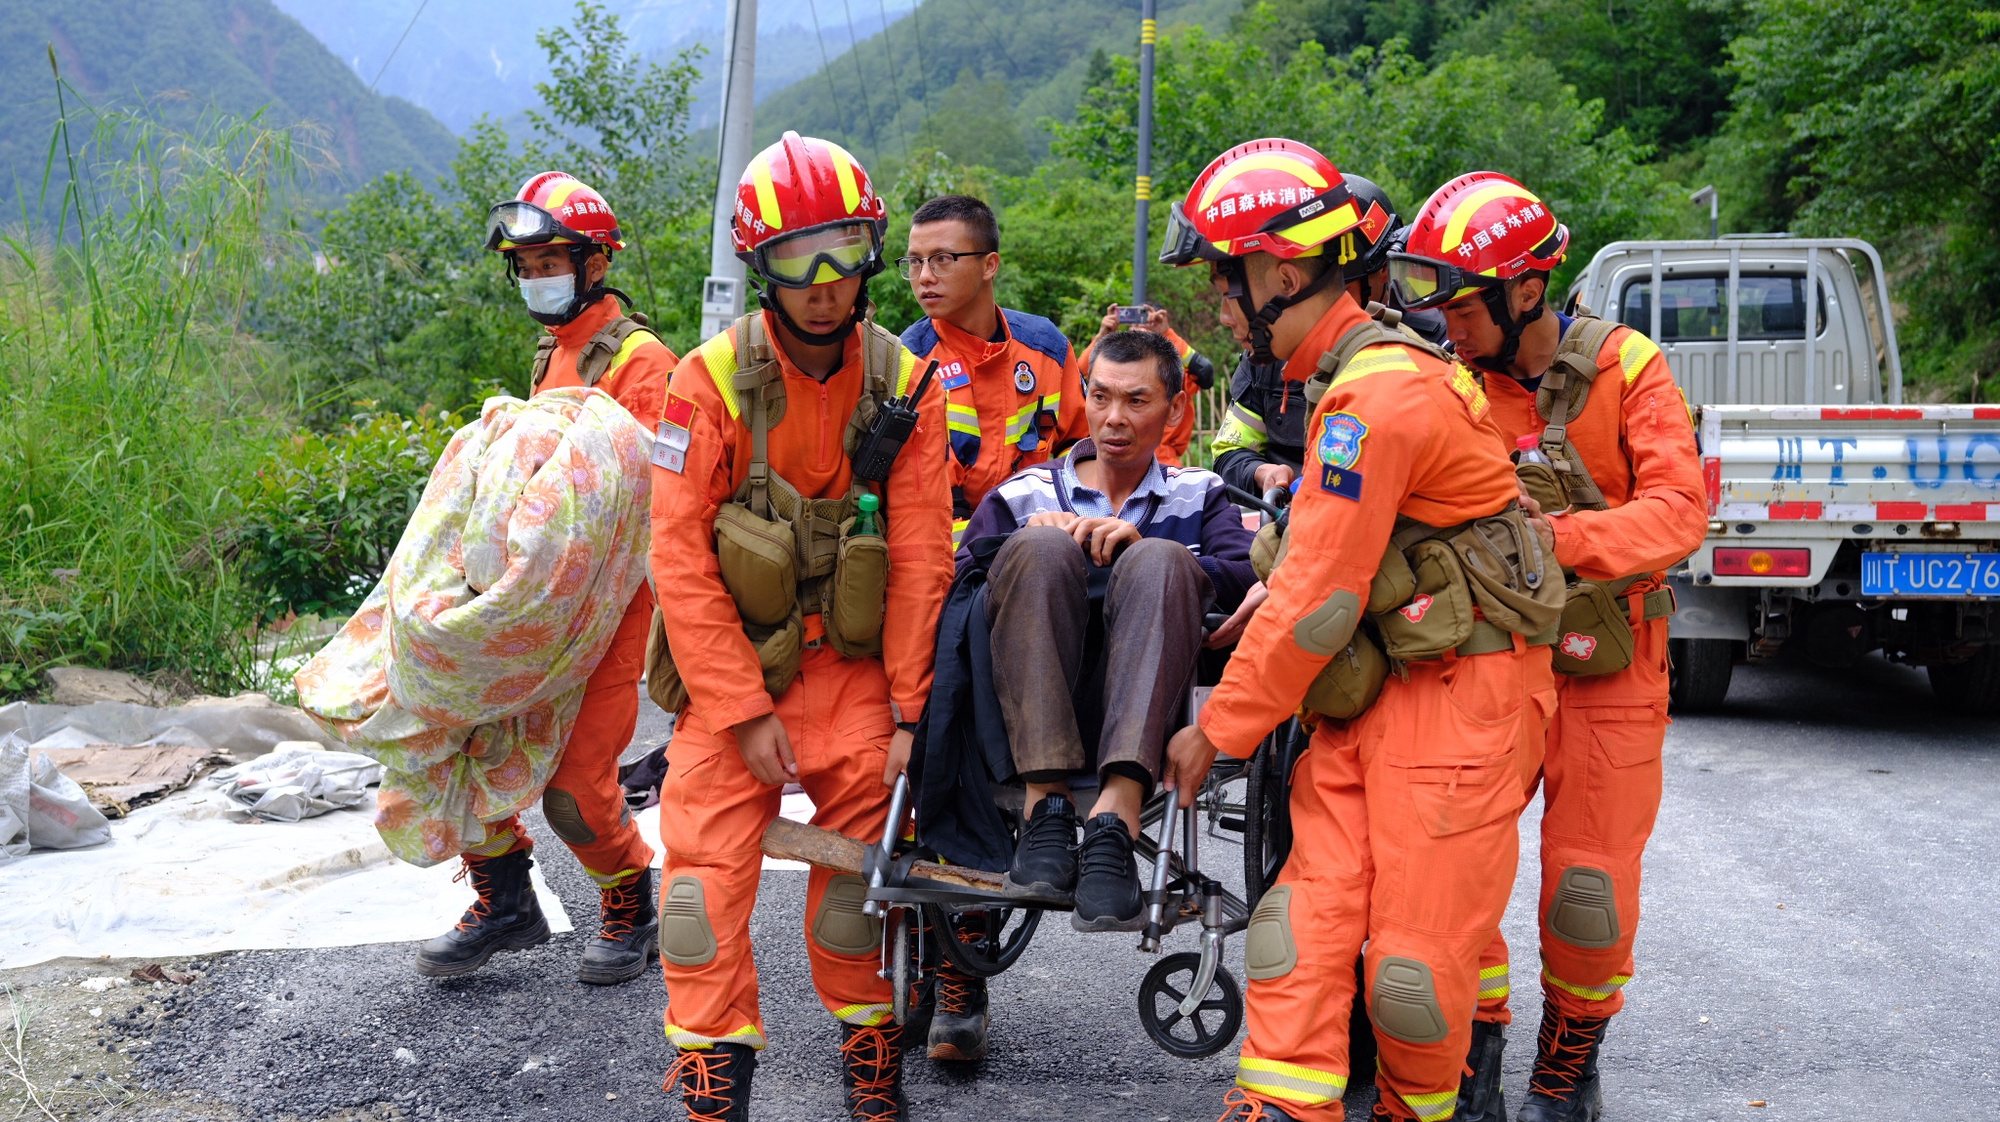 epa10163825 Rescuers evacuate injured people after the earthquake in Luding county, Ganzi prefecture, Sichuan Province, China, 06 September 2022. A 6.8 magnitude earthquake hit China’s southwest Sichuan province on 05 September. According to state media, the death toll has risen to at least 65 people, with more than 10 people missing and 200 injured. The strongest earthquake in the region since 2017 triggered landslides and shook the provincial capital Chengdu, whose 21 million residents are already under a COVID-19 lockdown. Chinese rescue teams saved 15 people while still trying to evacuate 1000 villagers from the epicenter in Luding that got isolated by the landslide.  EPA/STRINGER CHINA OUT